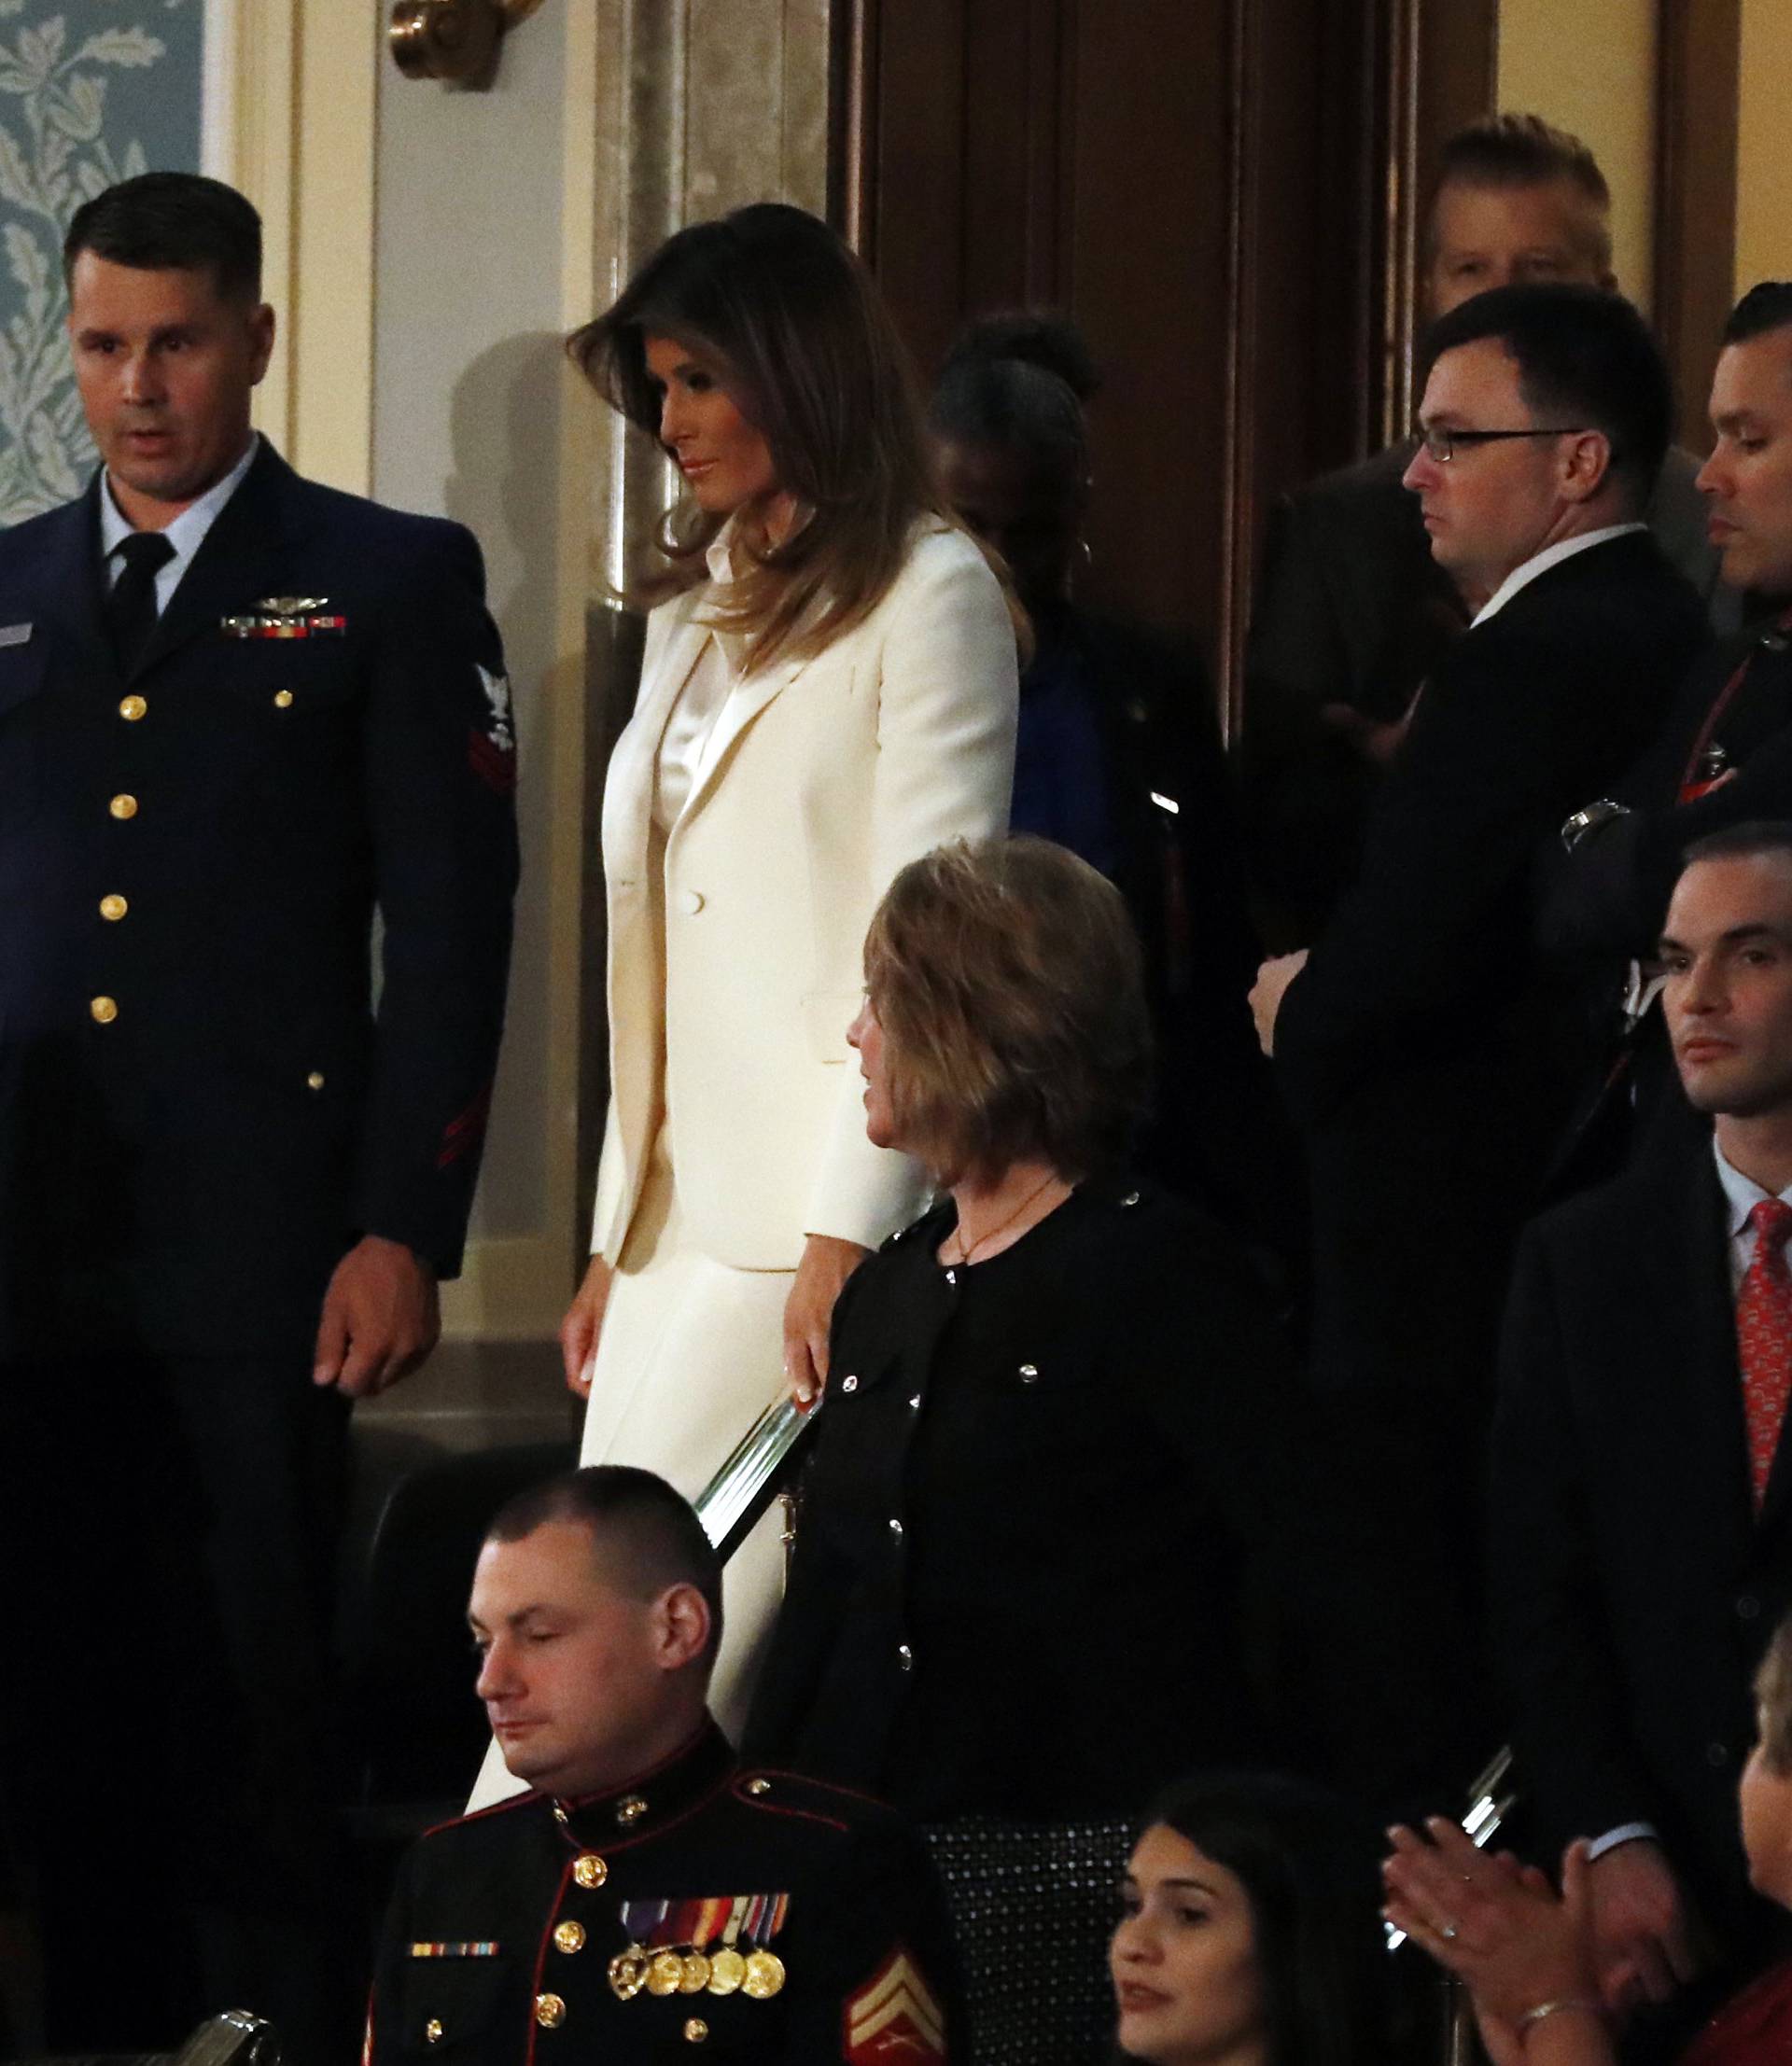 Melania Trump arrives for President Trump's State of the Union address in Washington